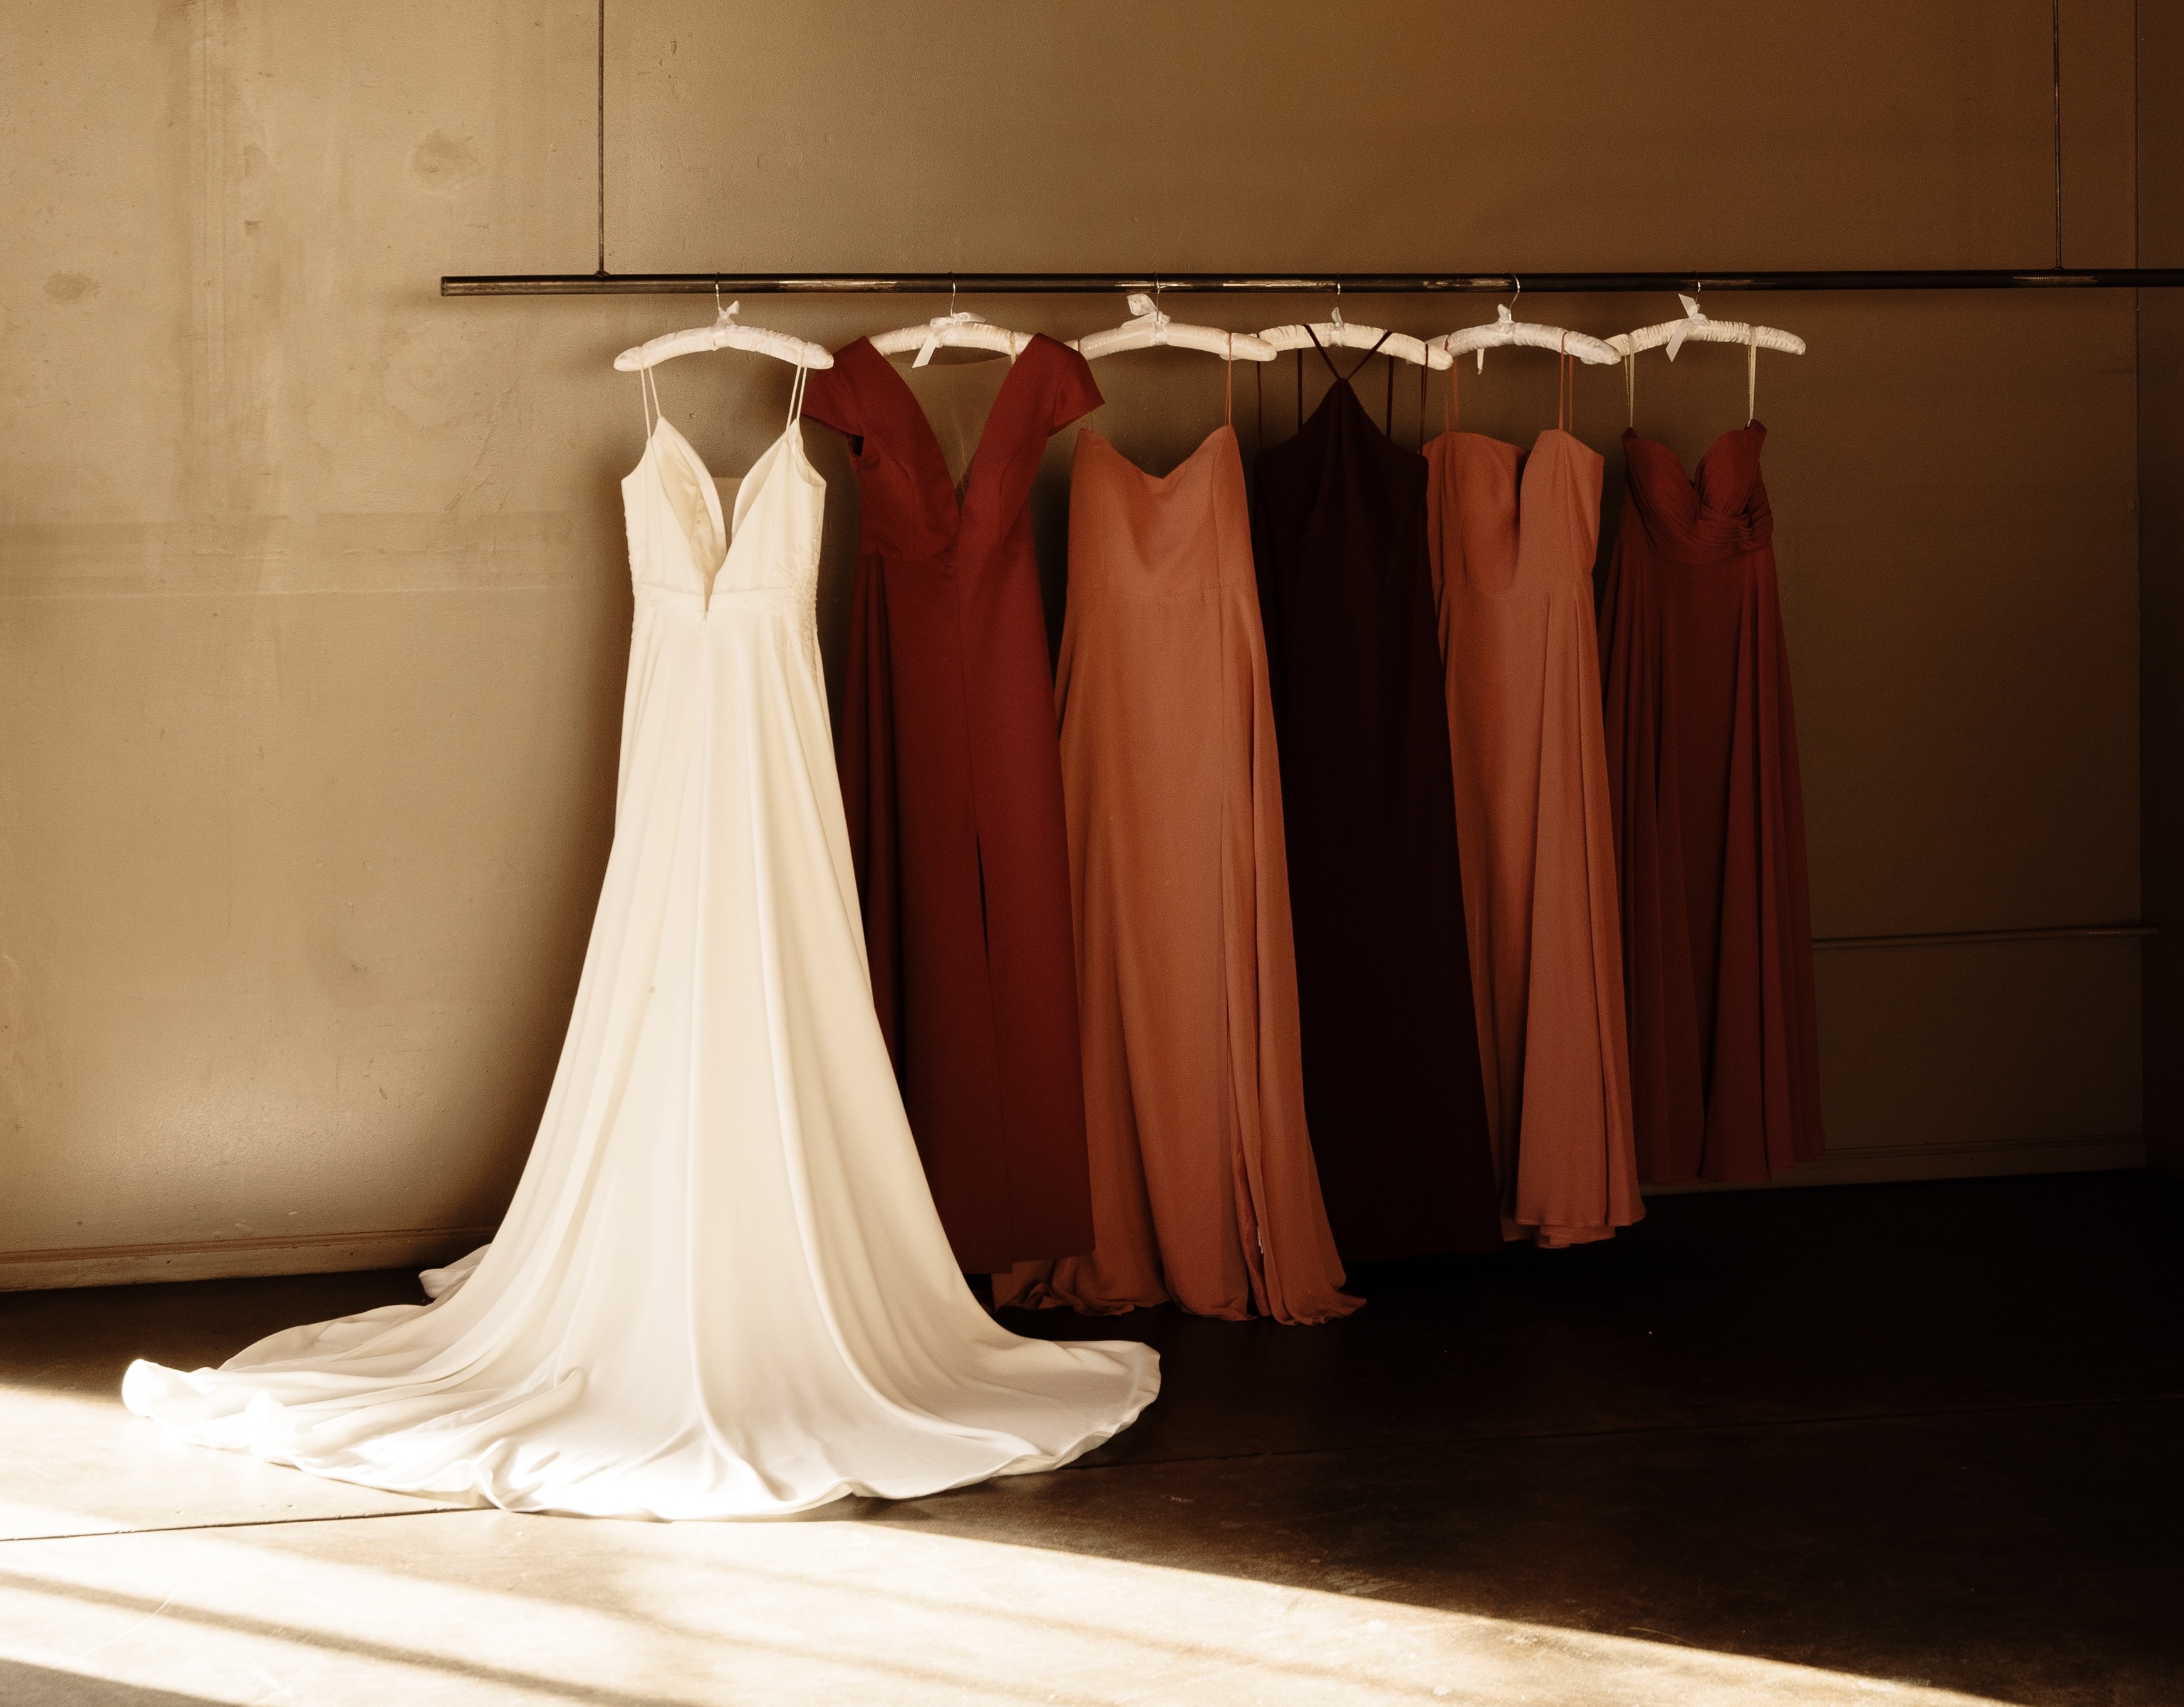 Wedding gown and four bridesmaids dresses in shades of red all hanging on a wall